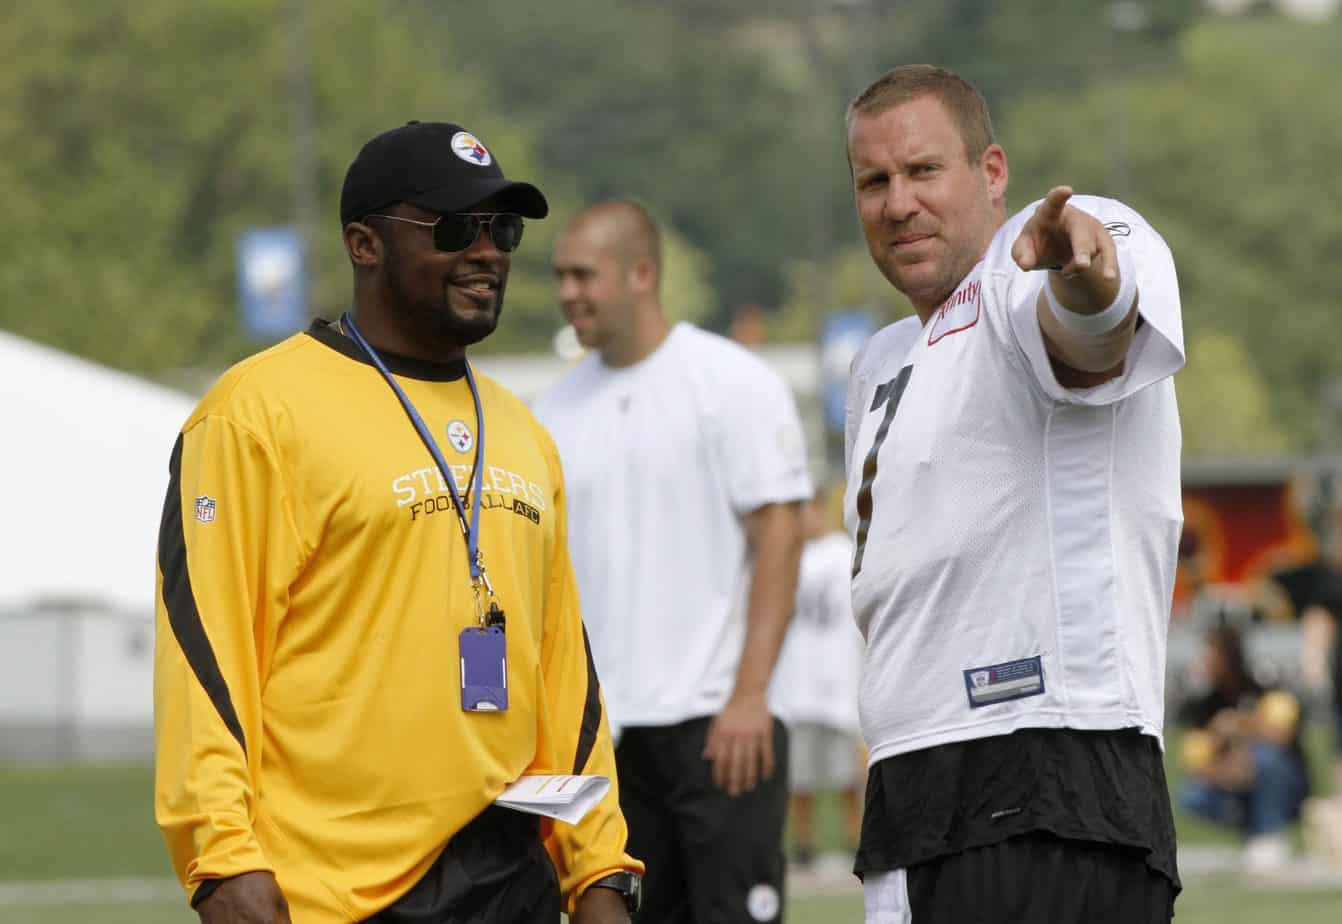 NFL Films leaked an incredibly awesome mic'd up moment between Ben Roethlisberger and Mike Tomlin following the QB's retirement announcement